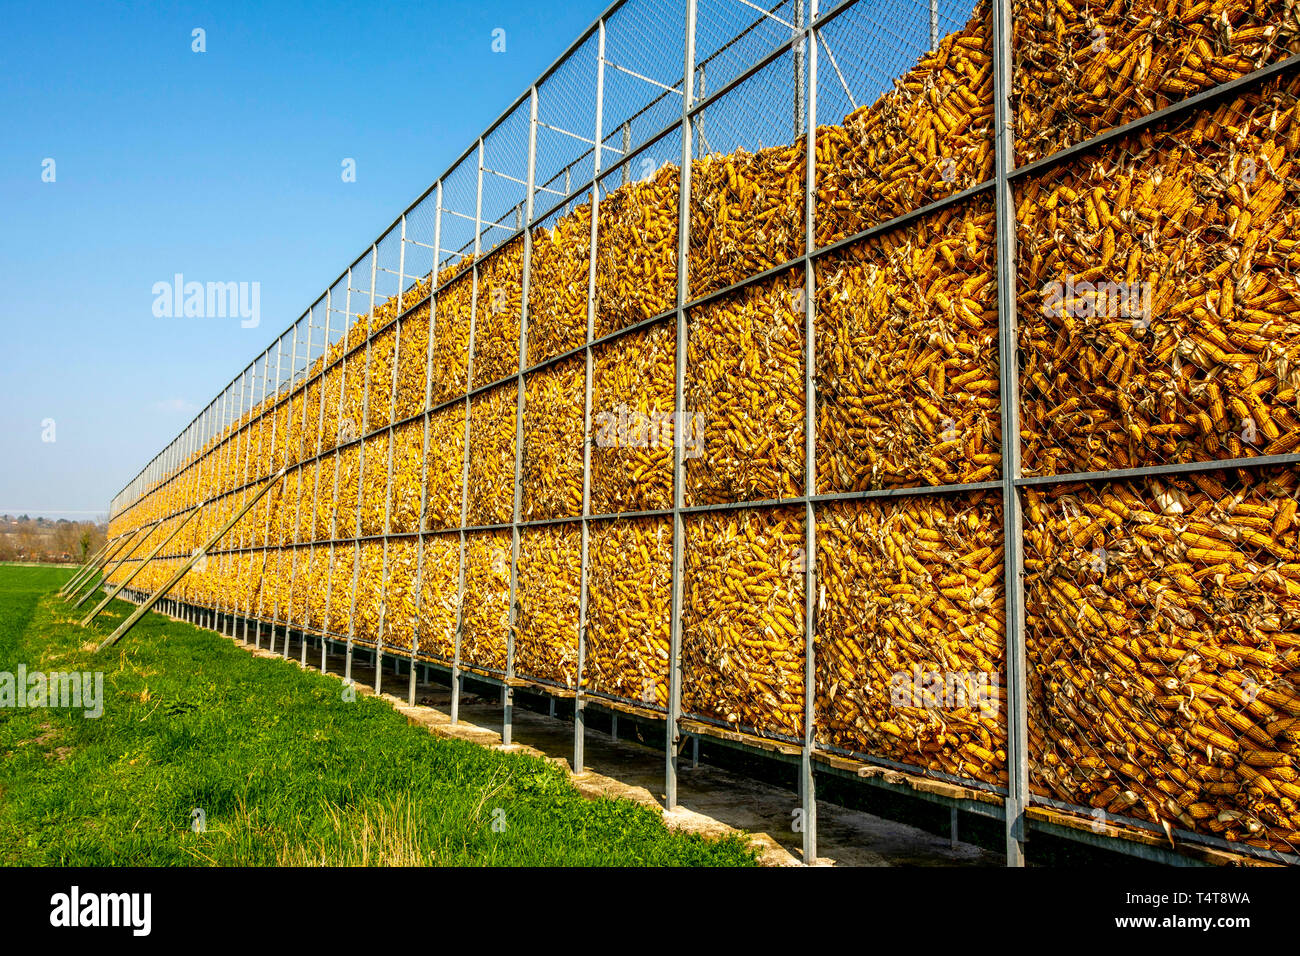 Storage of corncobs in a field in the countryside Stock Photo